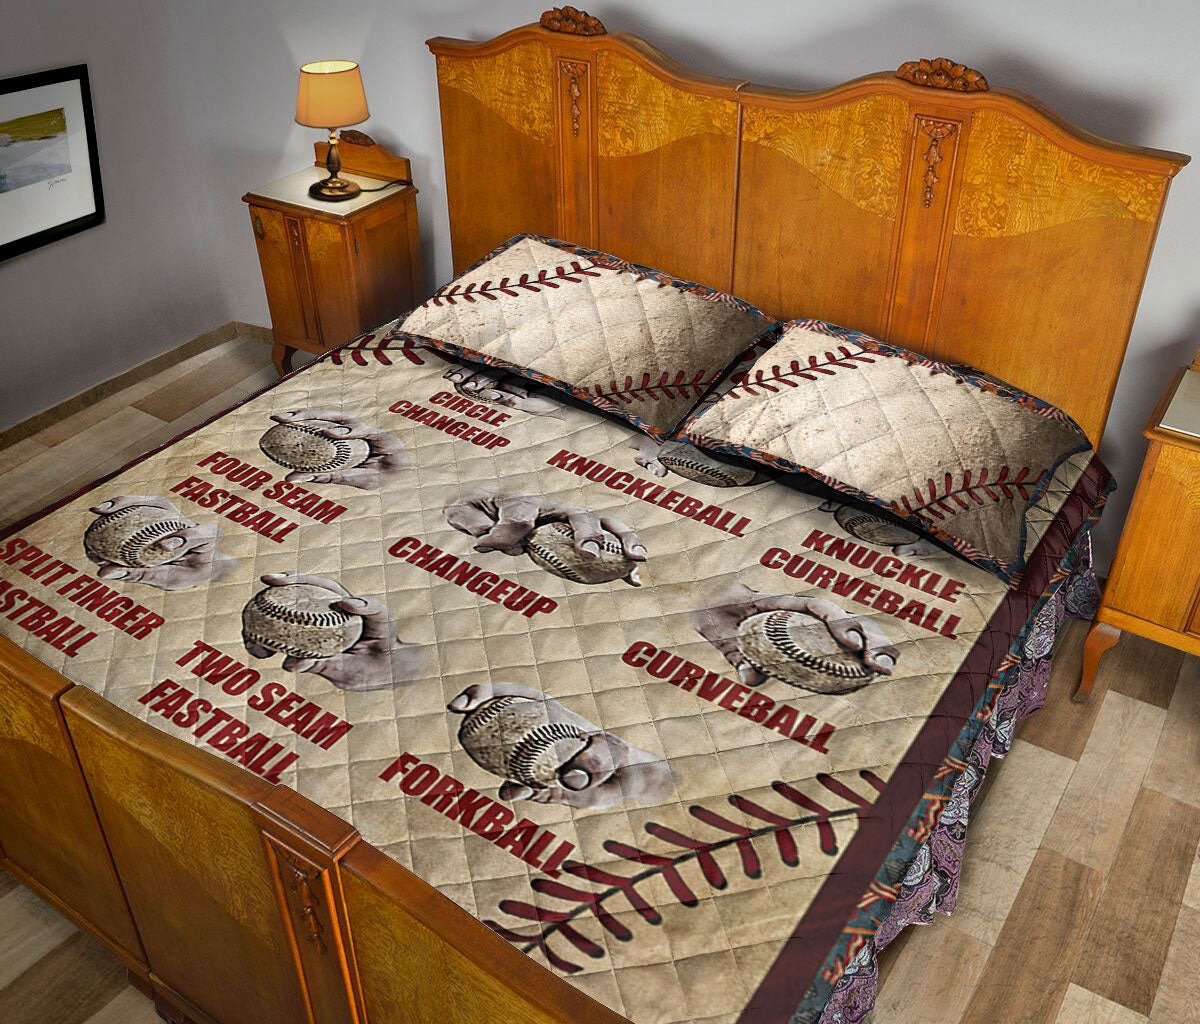 Ohaprints-Quilt-Bed-Set-Pillowcase-Baseball-Pitching-Grip-Baseball-Player-Lover-Fan-Gift-Vintage-Beige-Blanket-Bedspread-Bedding-1335-Queen (80'' x 90'')